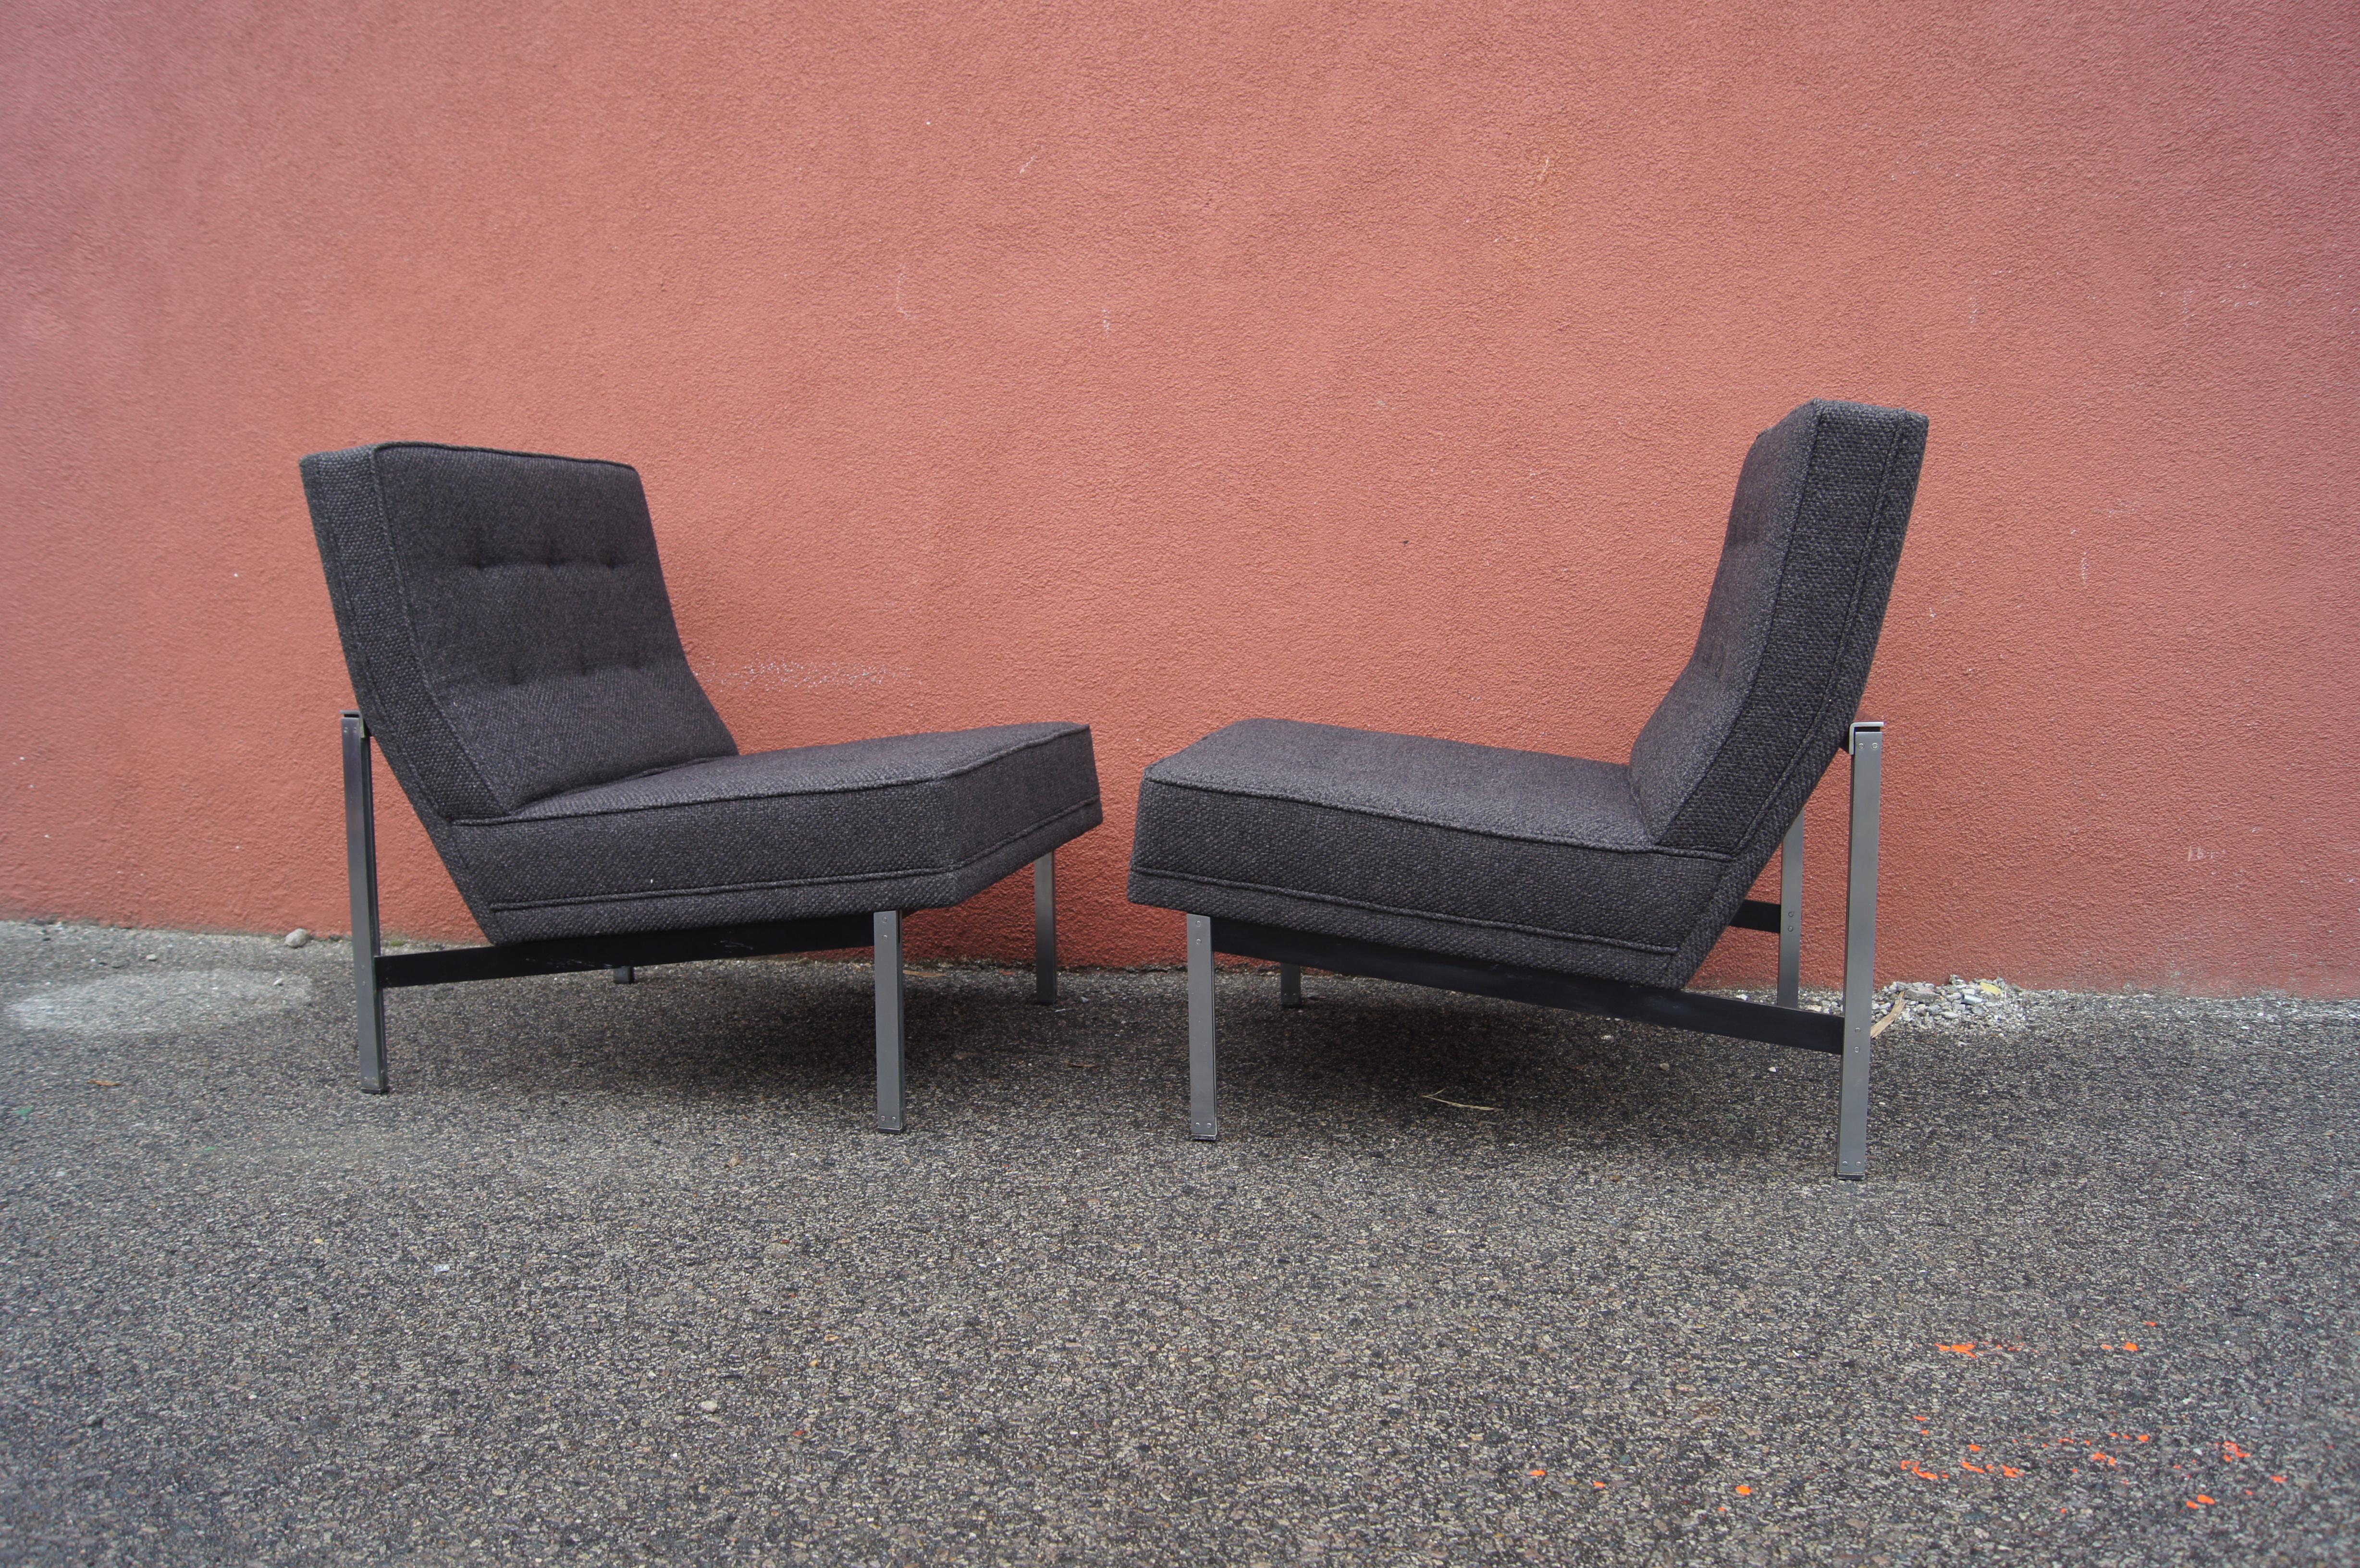 Florence Knoll's parallel bar lounge chair, model 51, places an armless angled seat upon a squared-off steel frame with a brushed chrome and black finish. The tufted back and seat of this pair have been newly reupholstered in Knoll's Ferry bouclé in